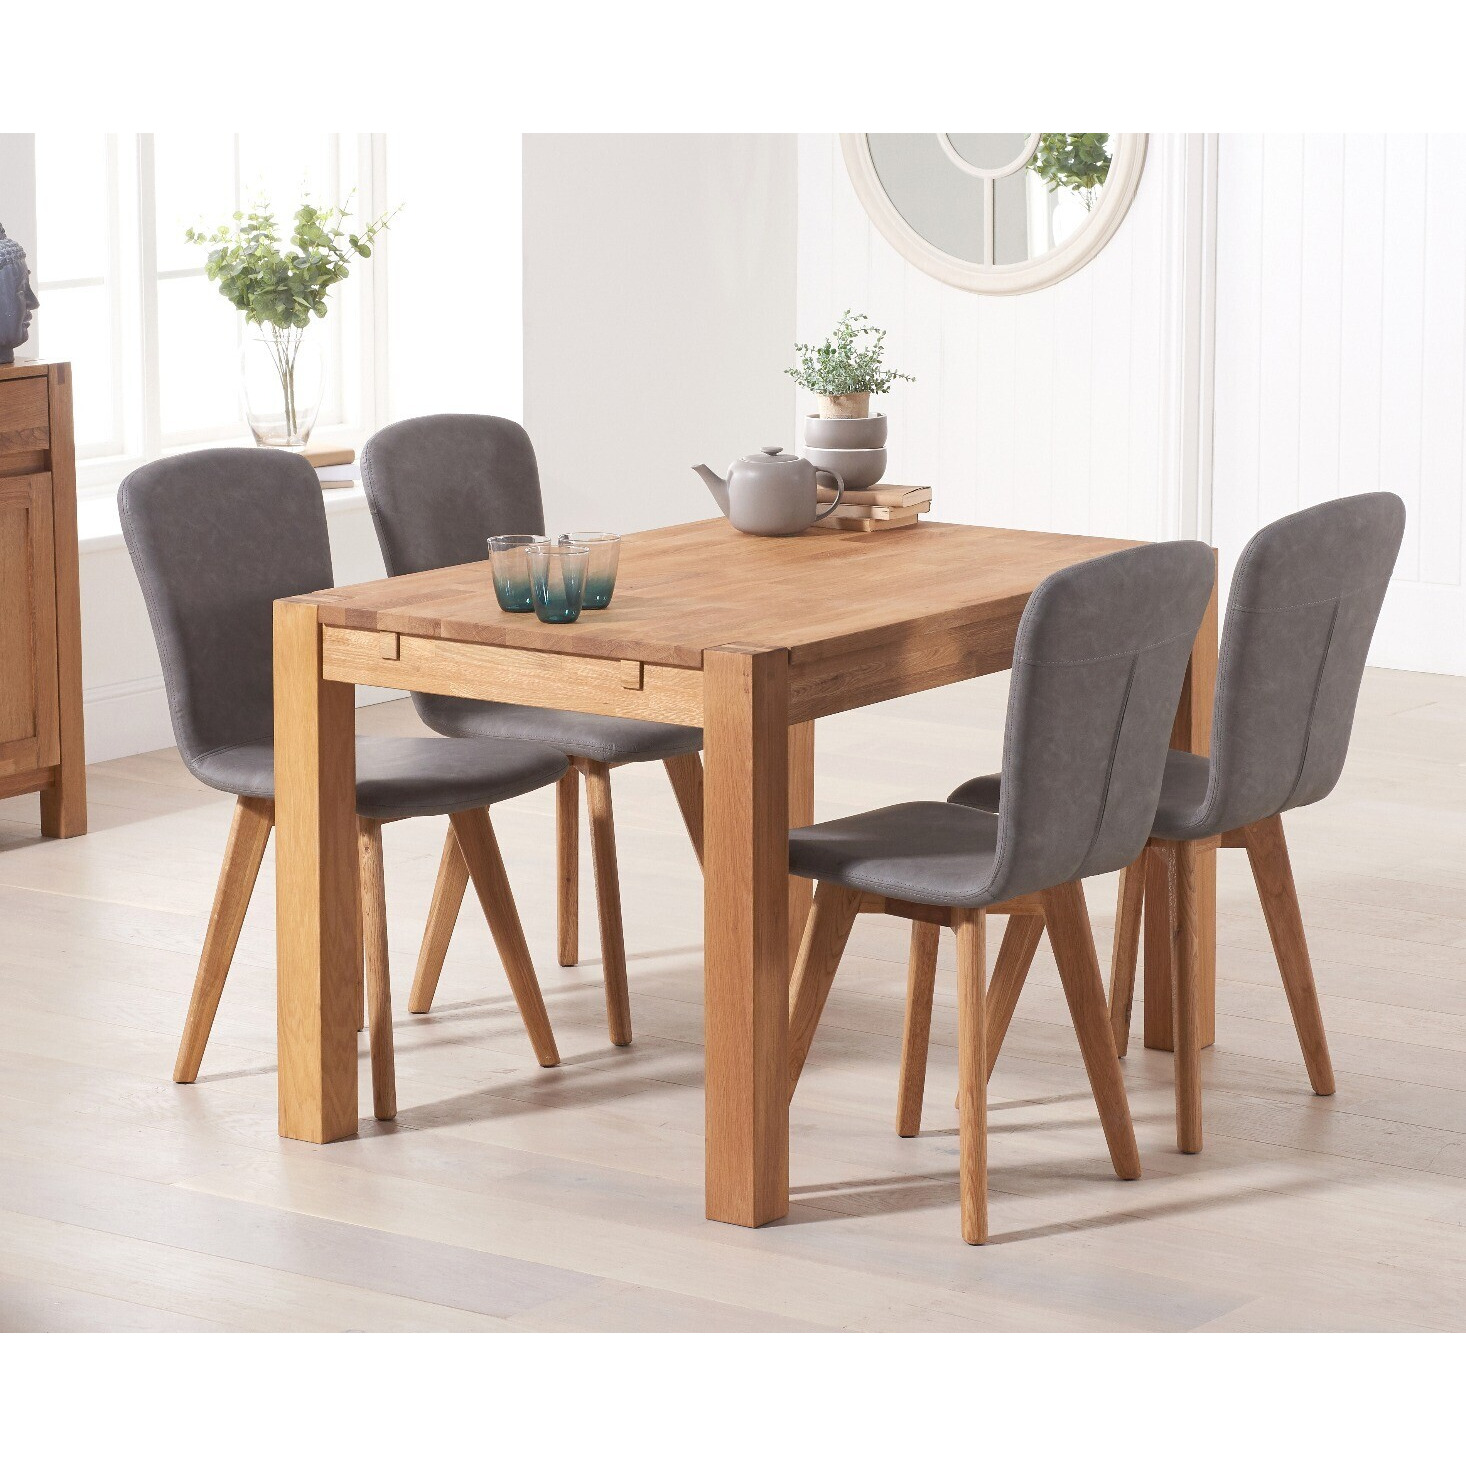 Thetford 120cm Oak Dining Table with 4 Grey Ruben Chairs